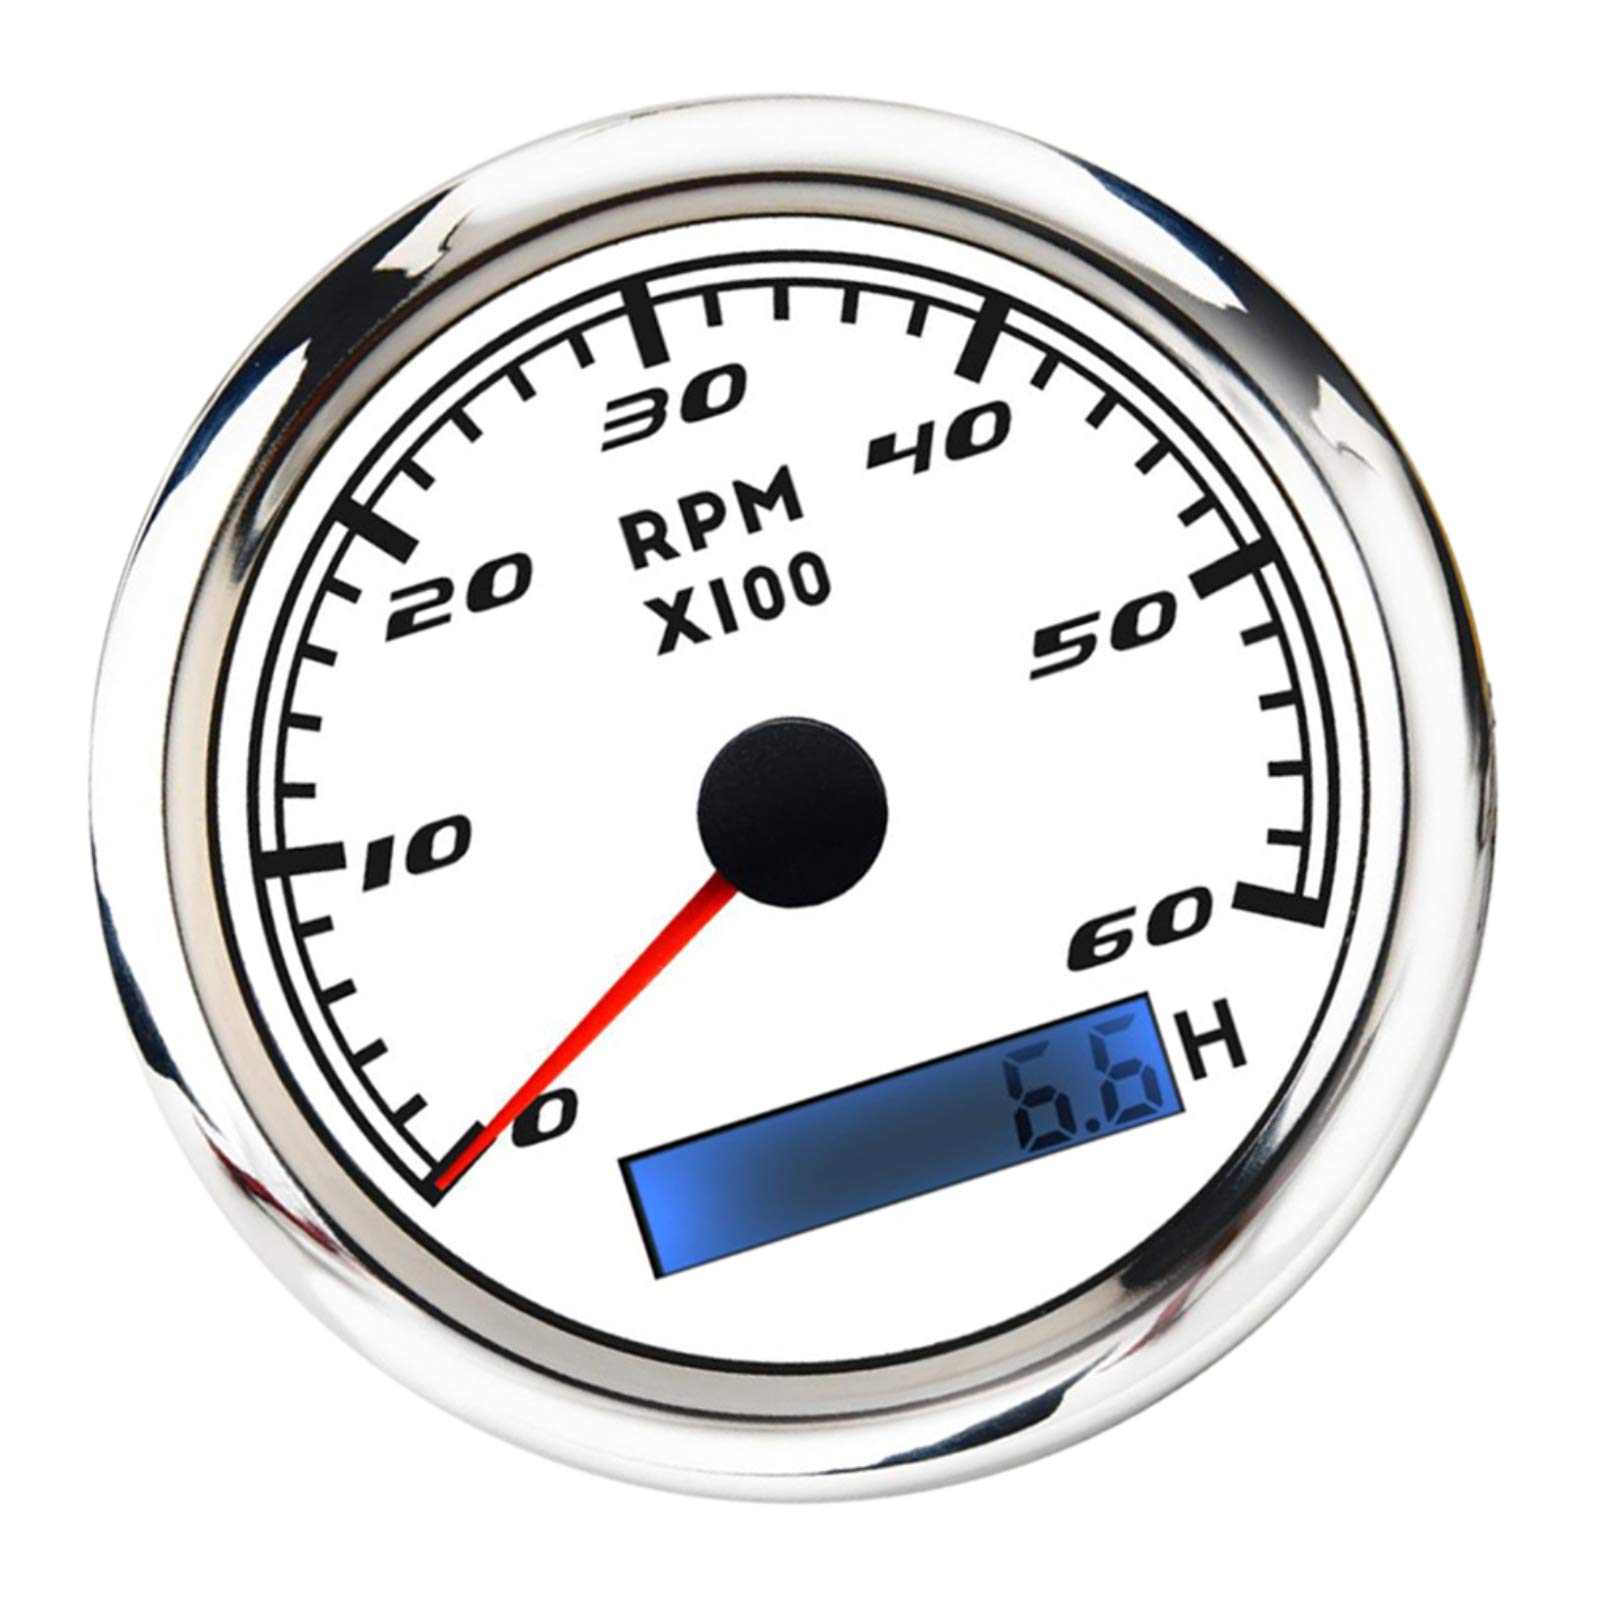 85MM Boat Tachometer Gauge 6000RPM Tacho Meter Waterproof for Marine Car with LCD Hourmeter Red Backlight for Outboard Diesel Engine Boat Car Truck...